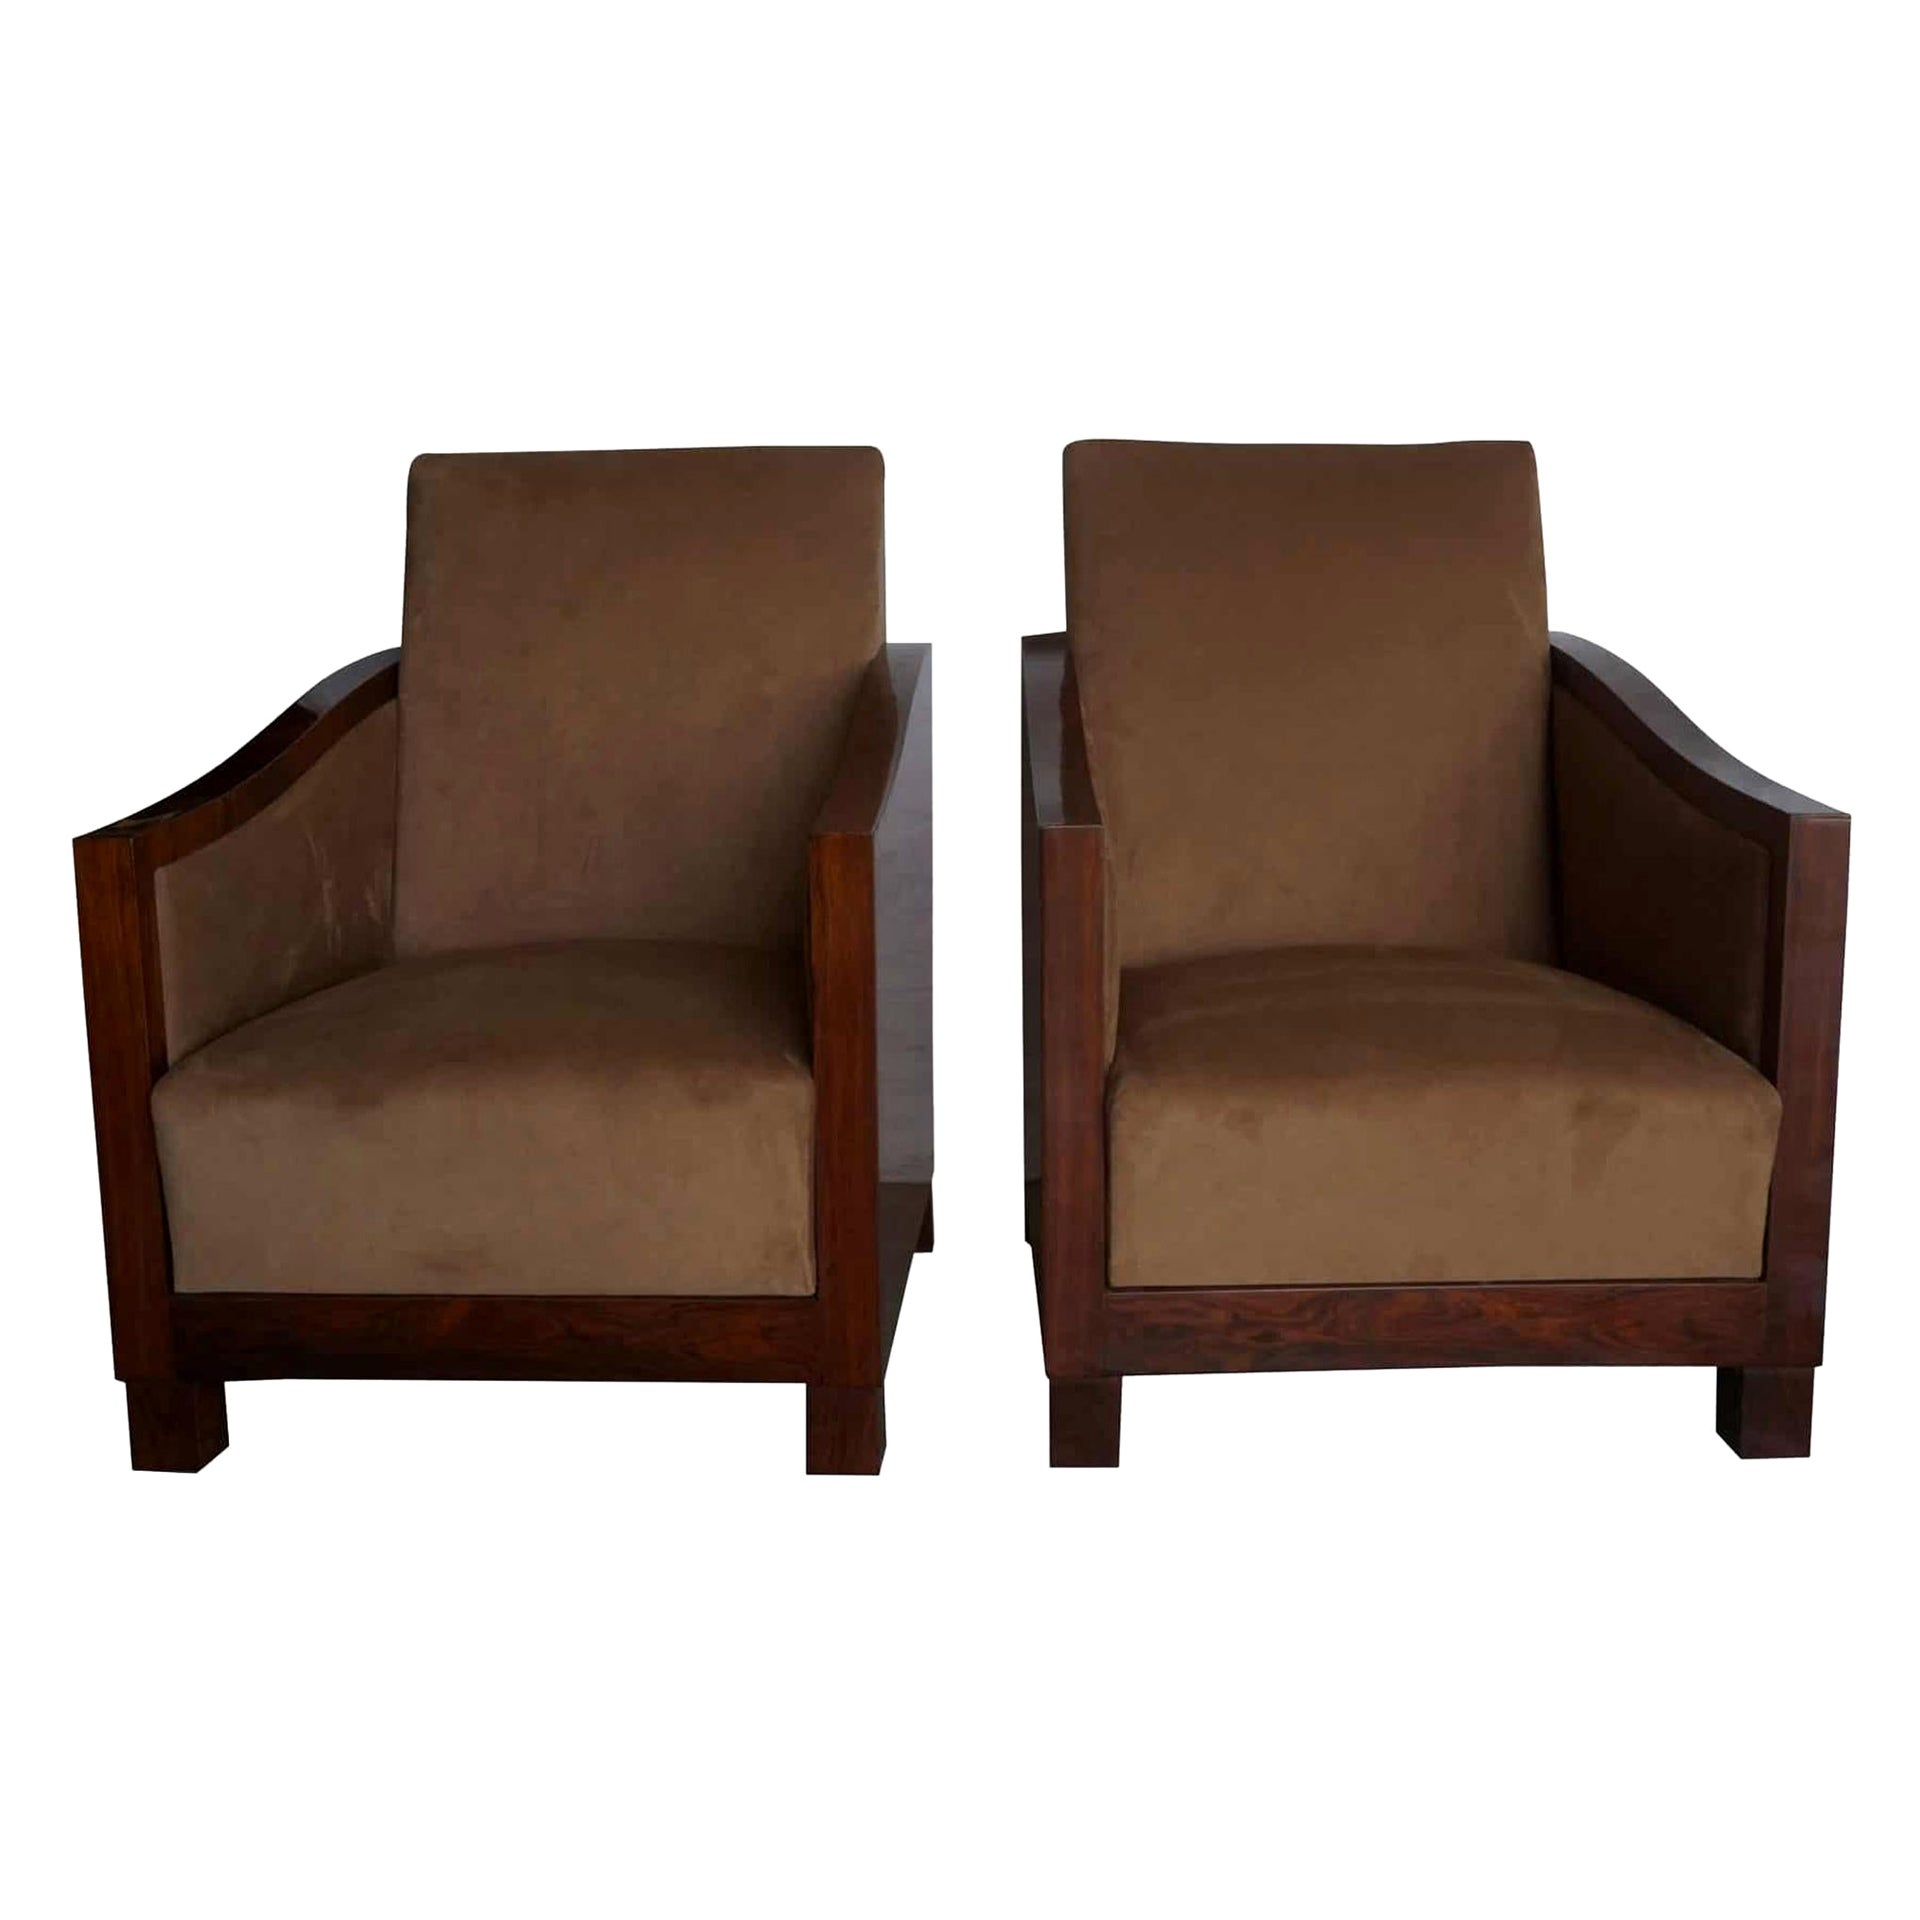 20th Century French Art Deco Club Chairs, Brown Walnut Side Chairs